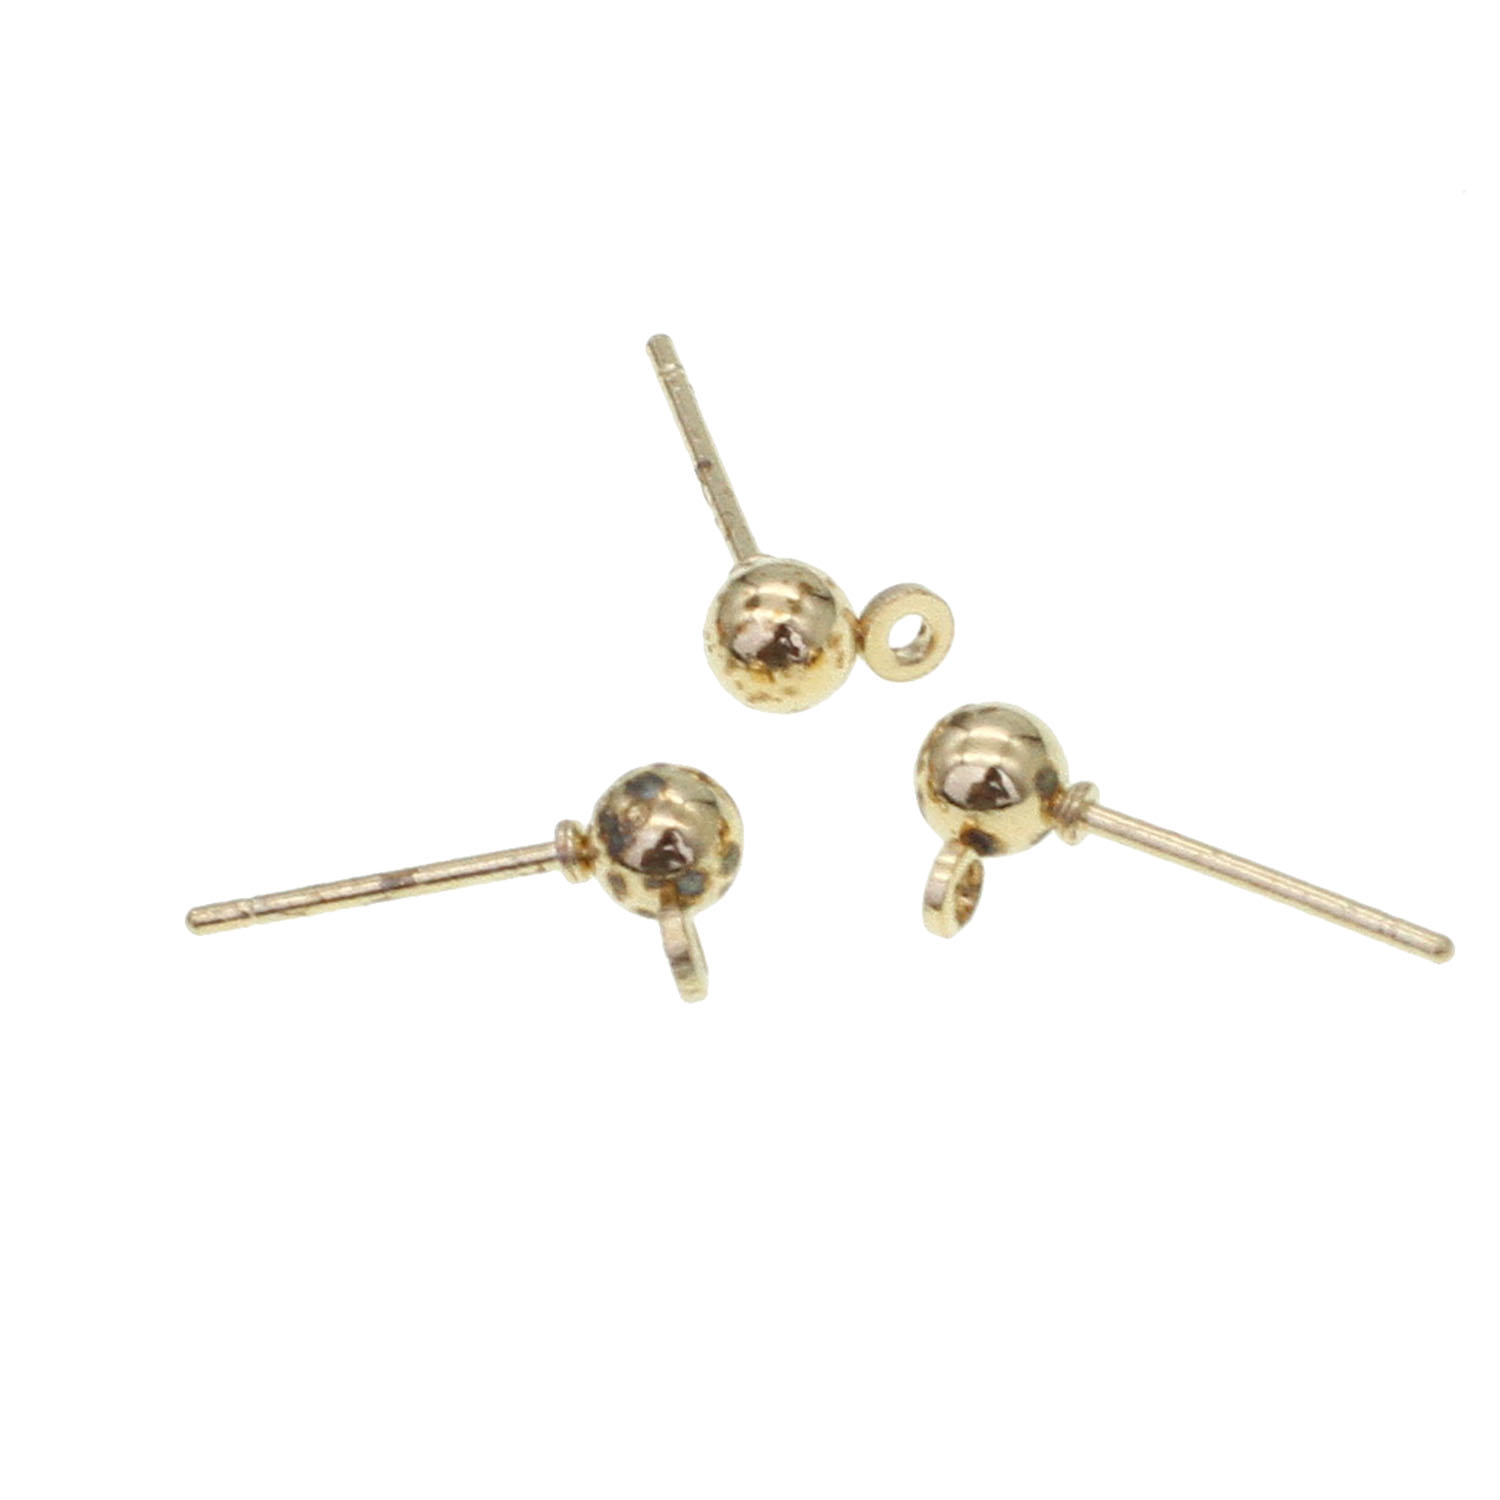 Gold 5mm pack of 1000